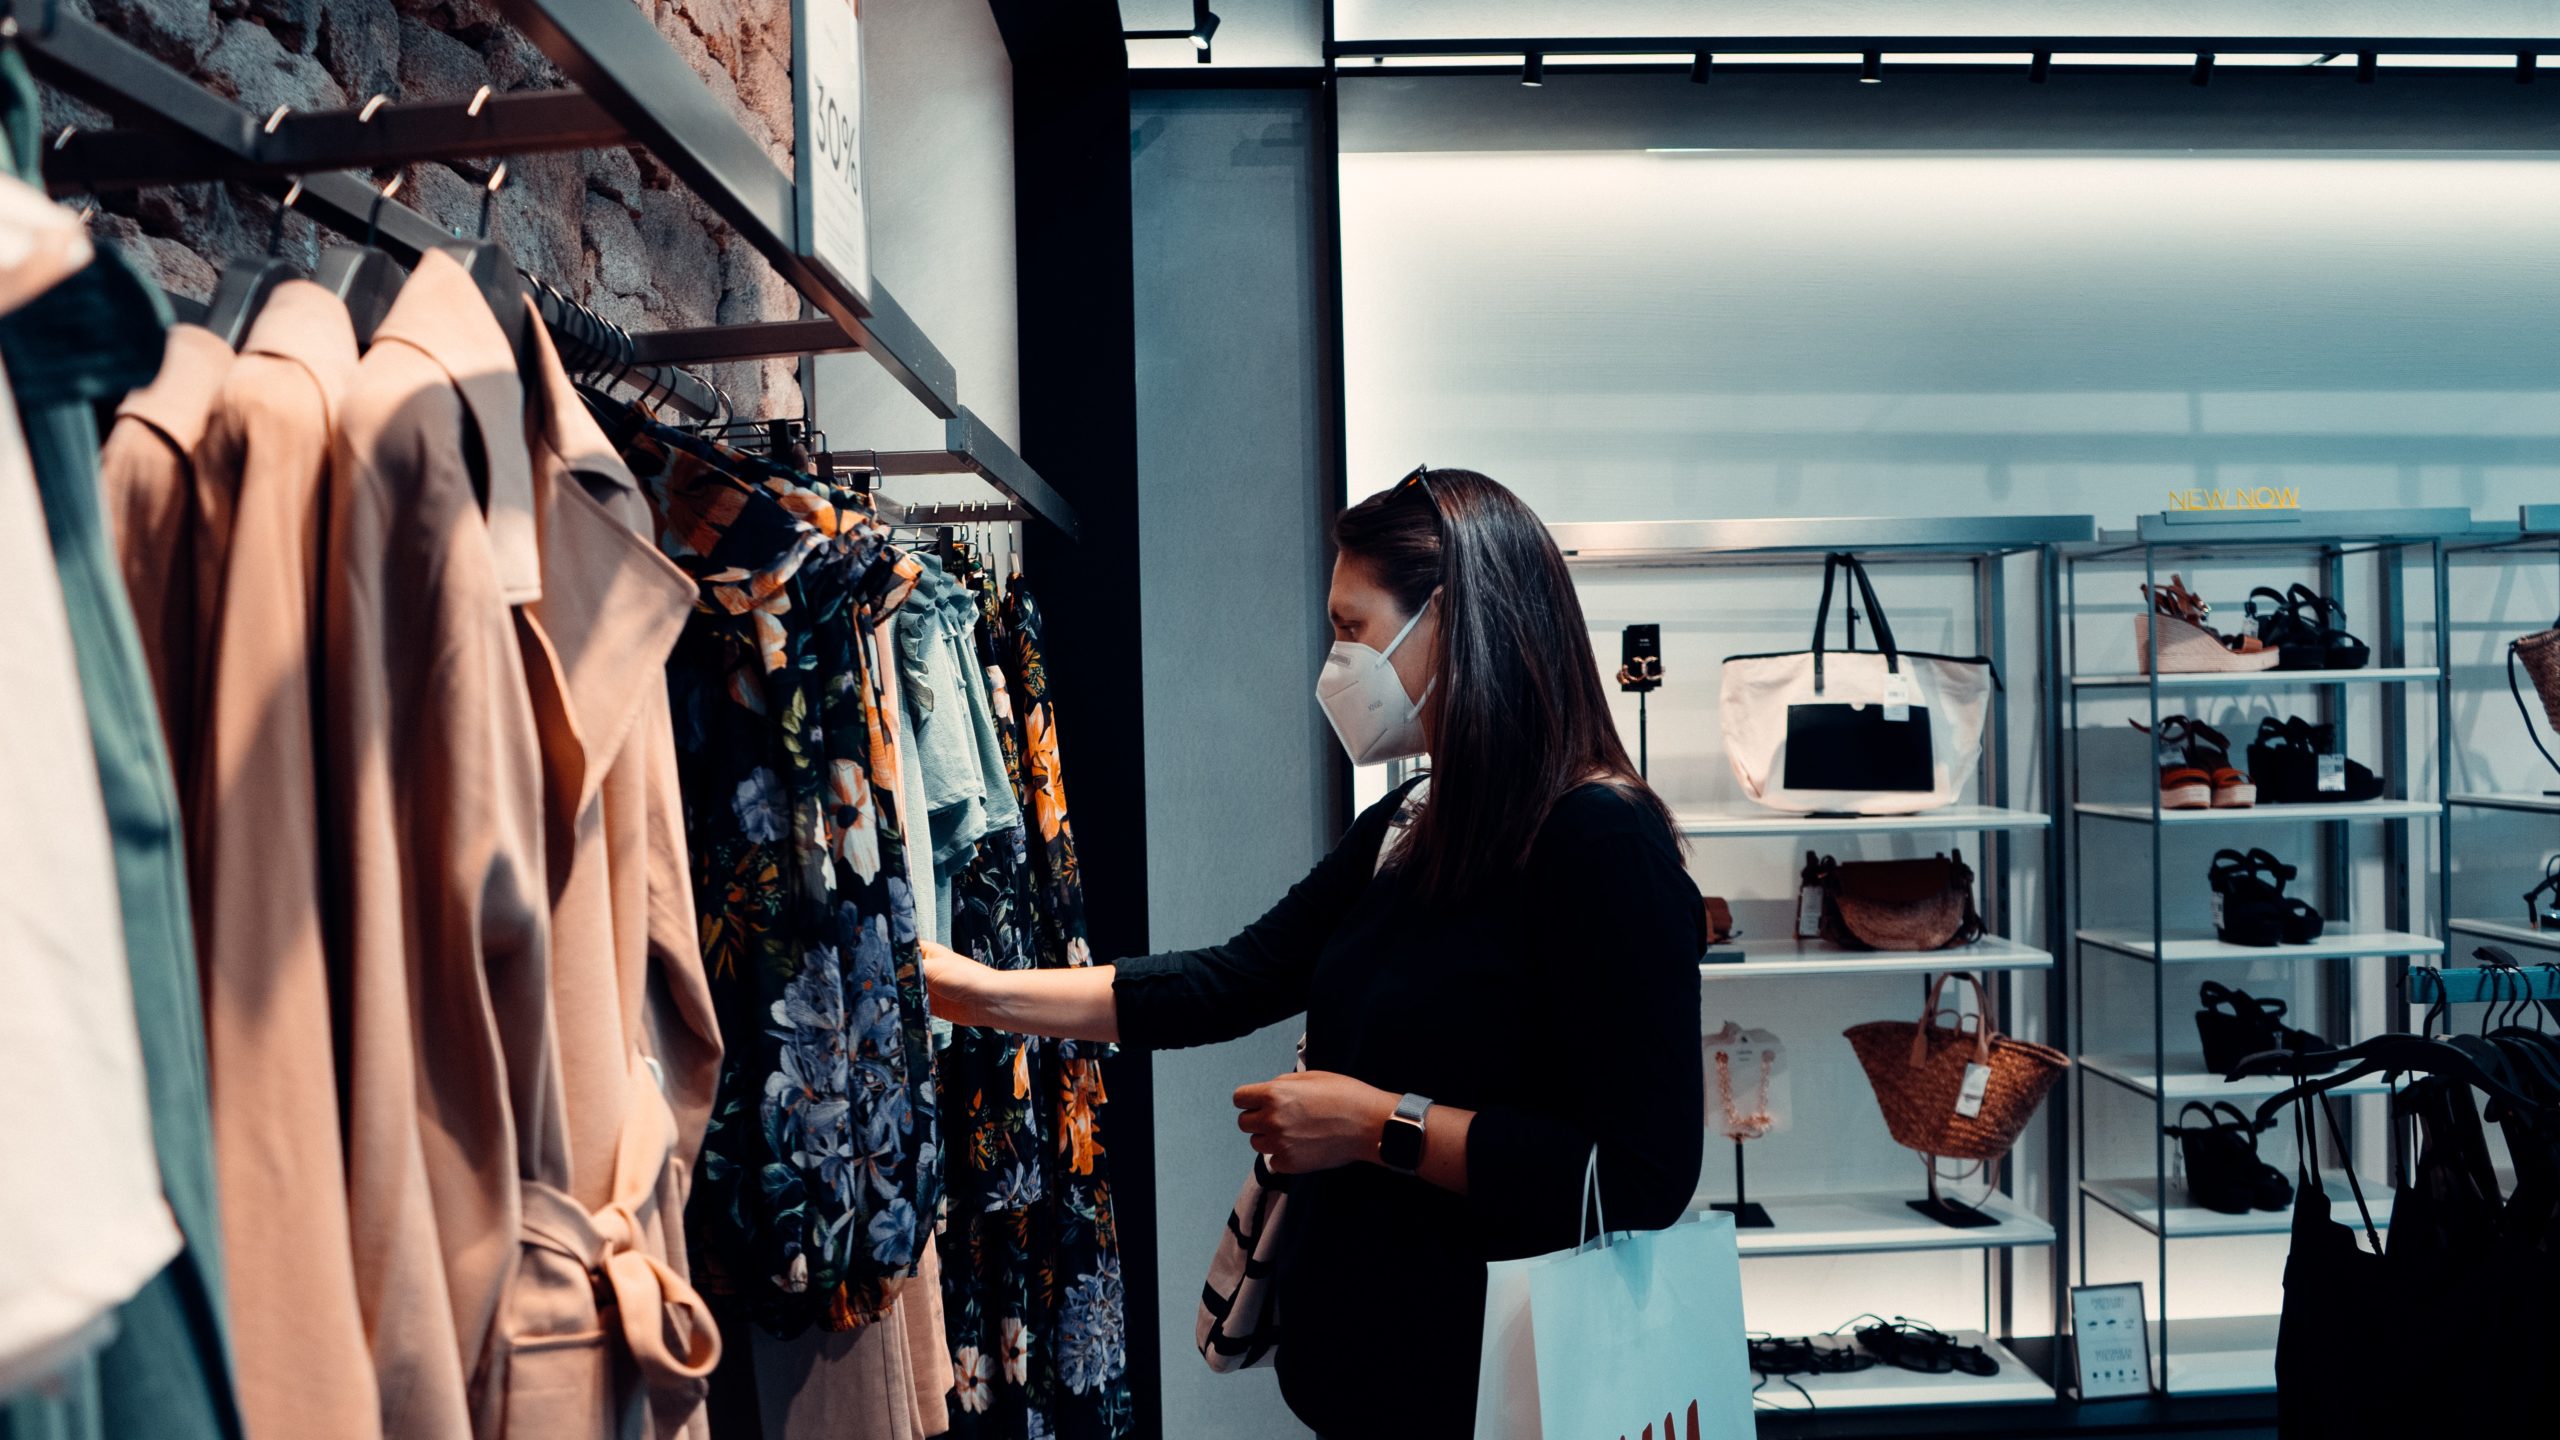 A woman shopping in a store